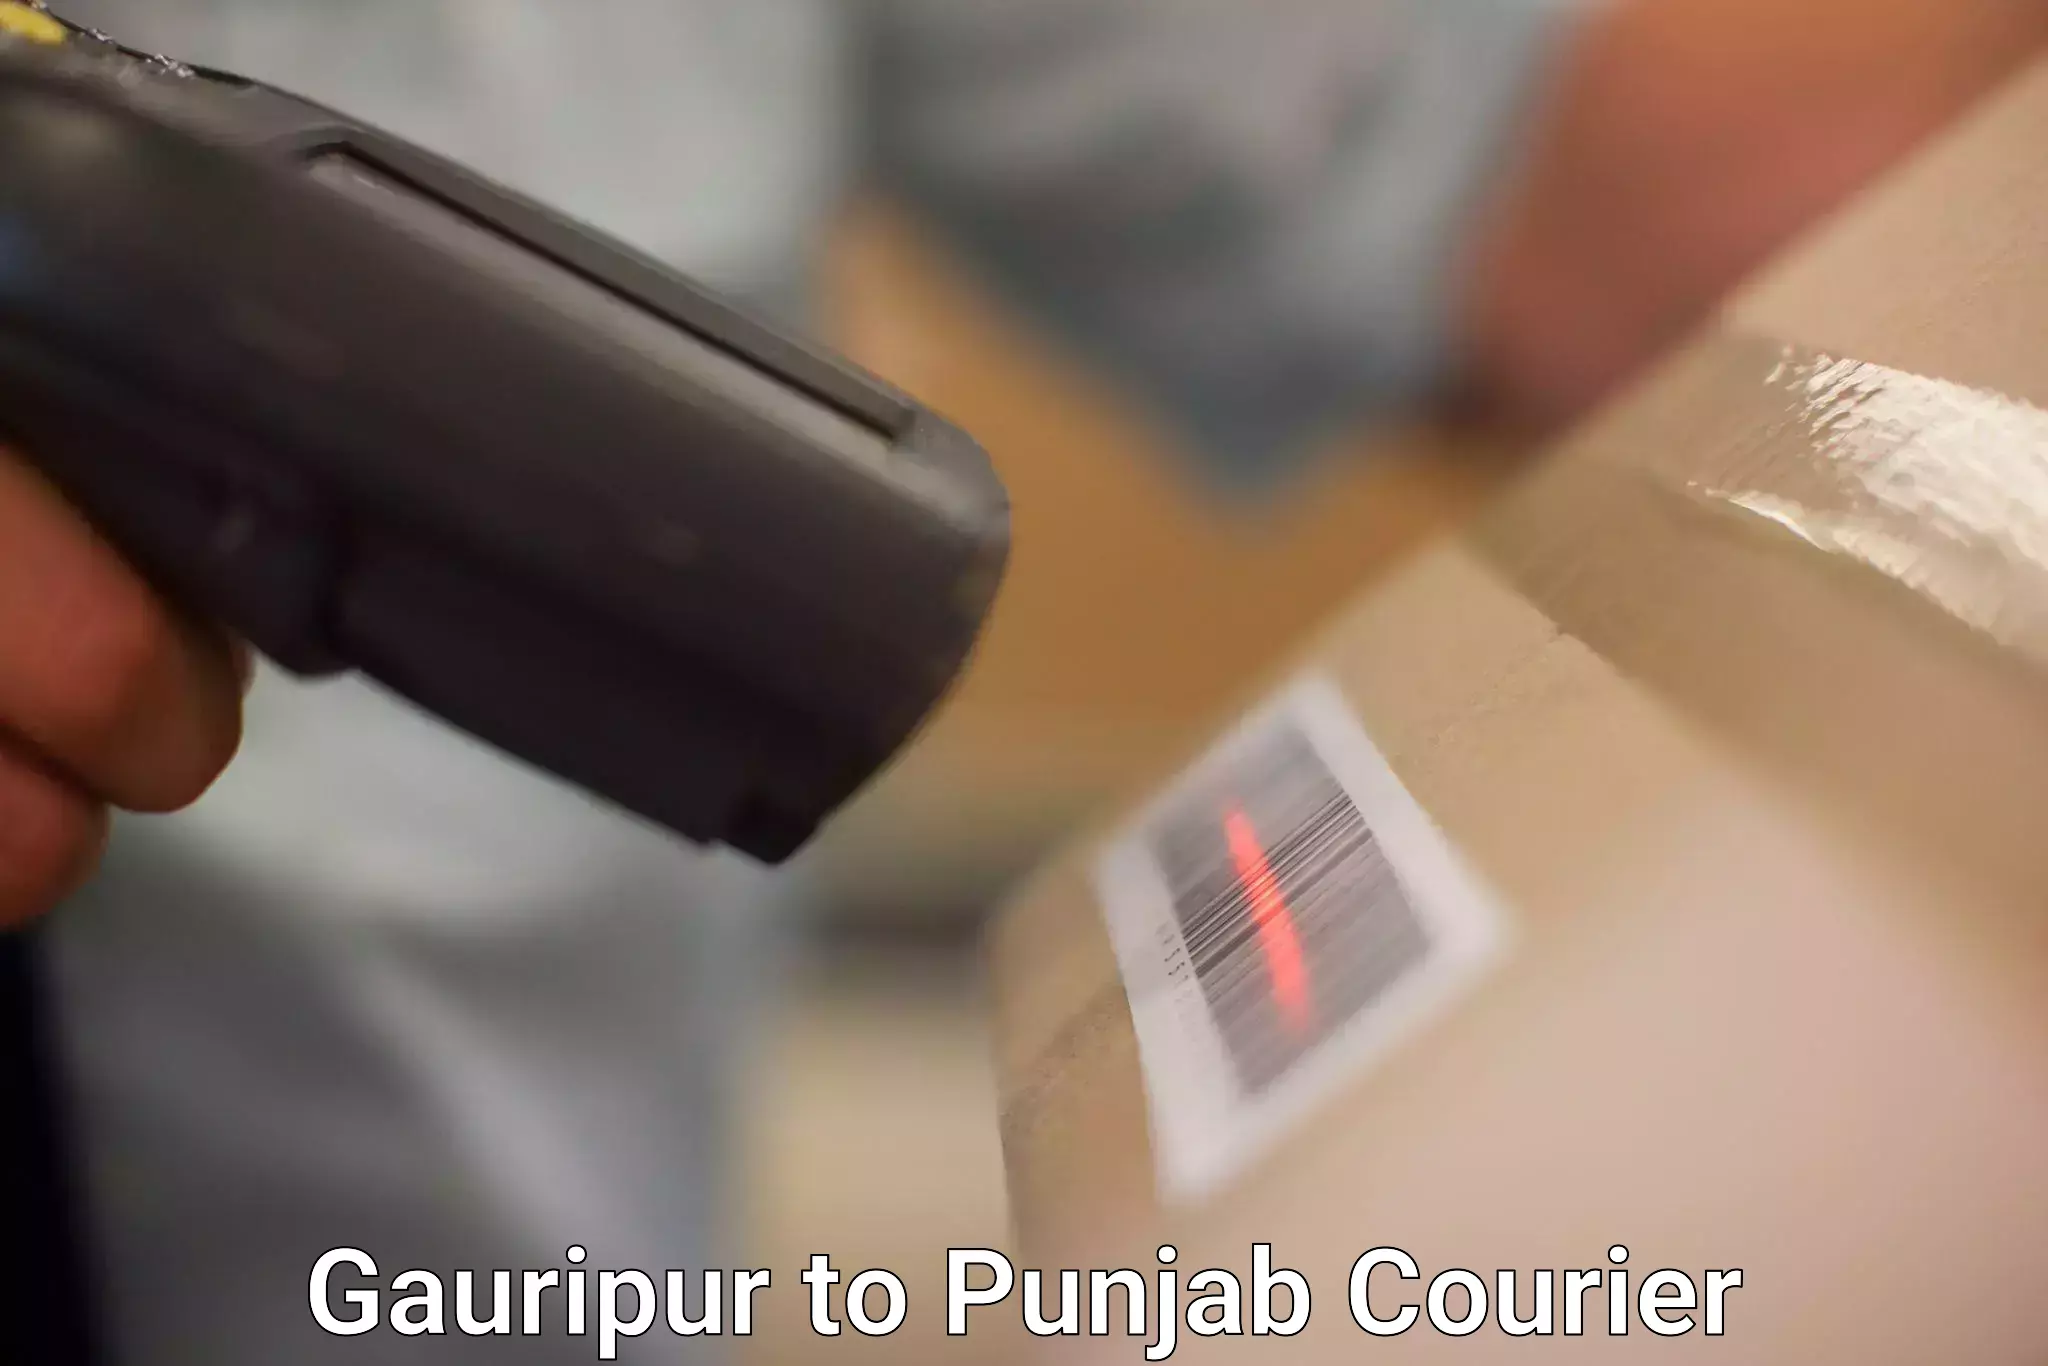 High-priority parcel service Gauripur to Muktsar